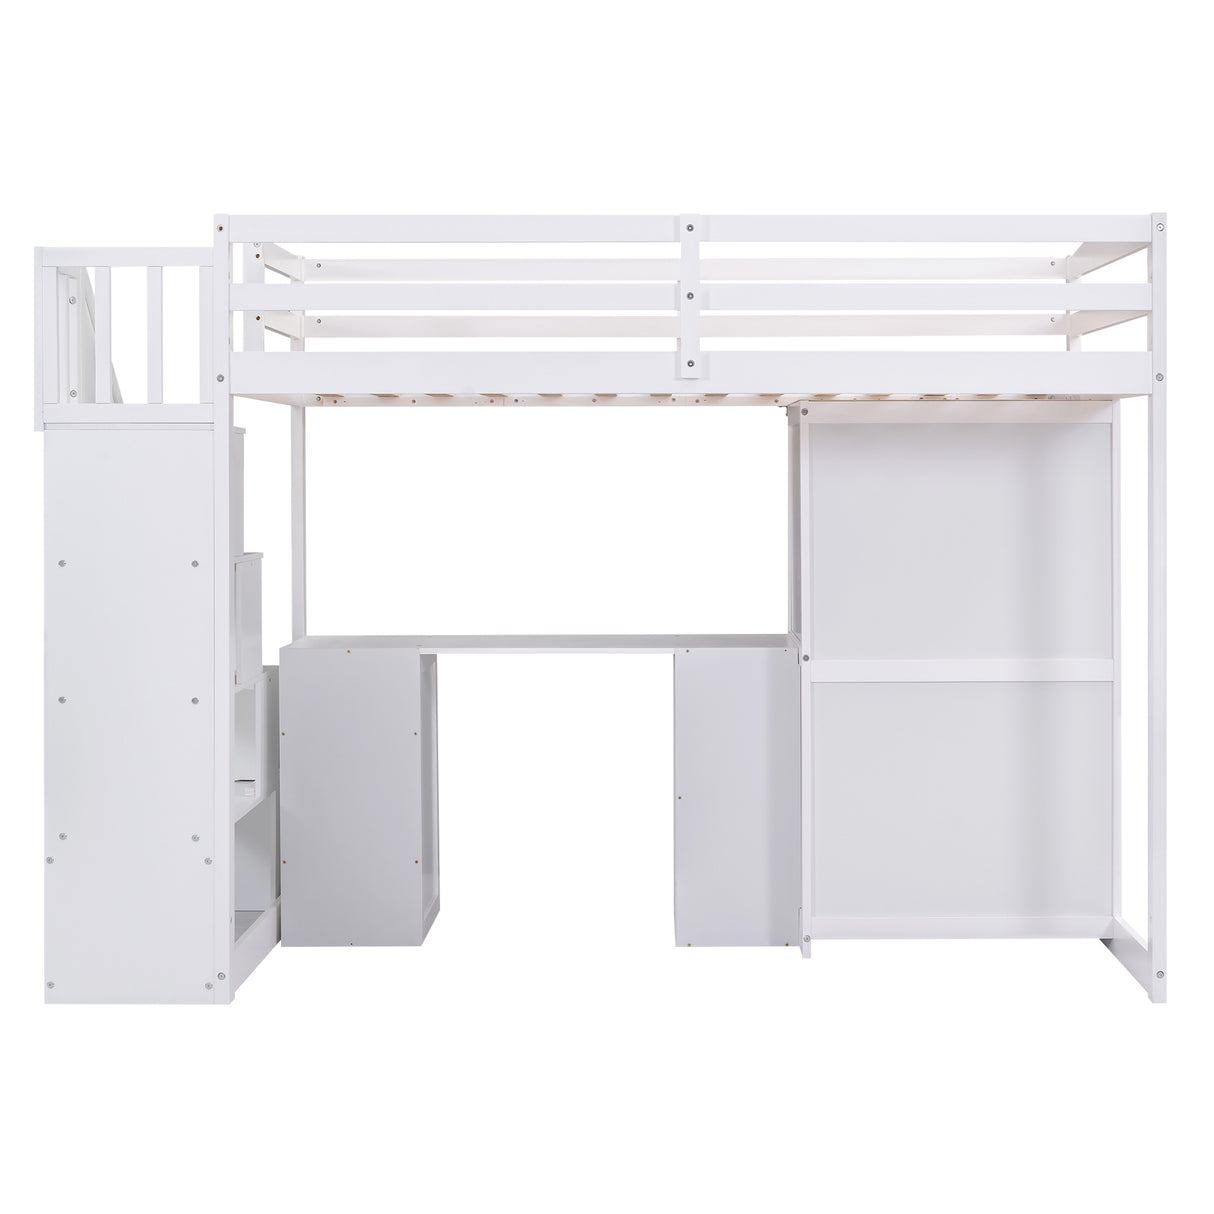 Twin Size Loft Bed with Wardrobe and Staircase, Desk and Storage Drawers and Cabinet in 1, White - Home Elegance USA